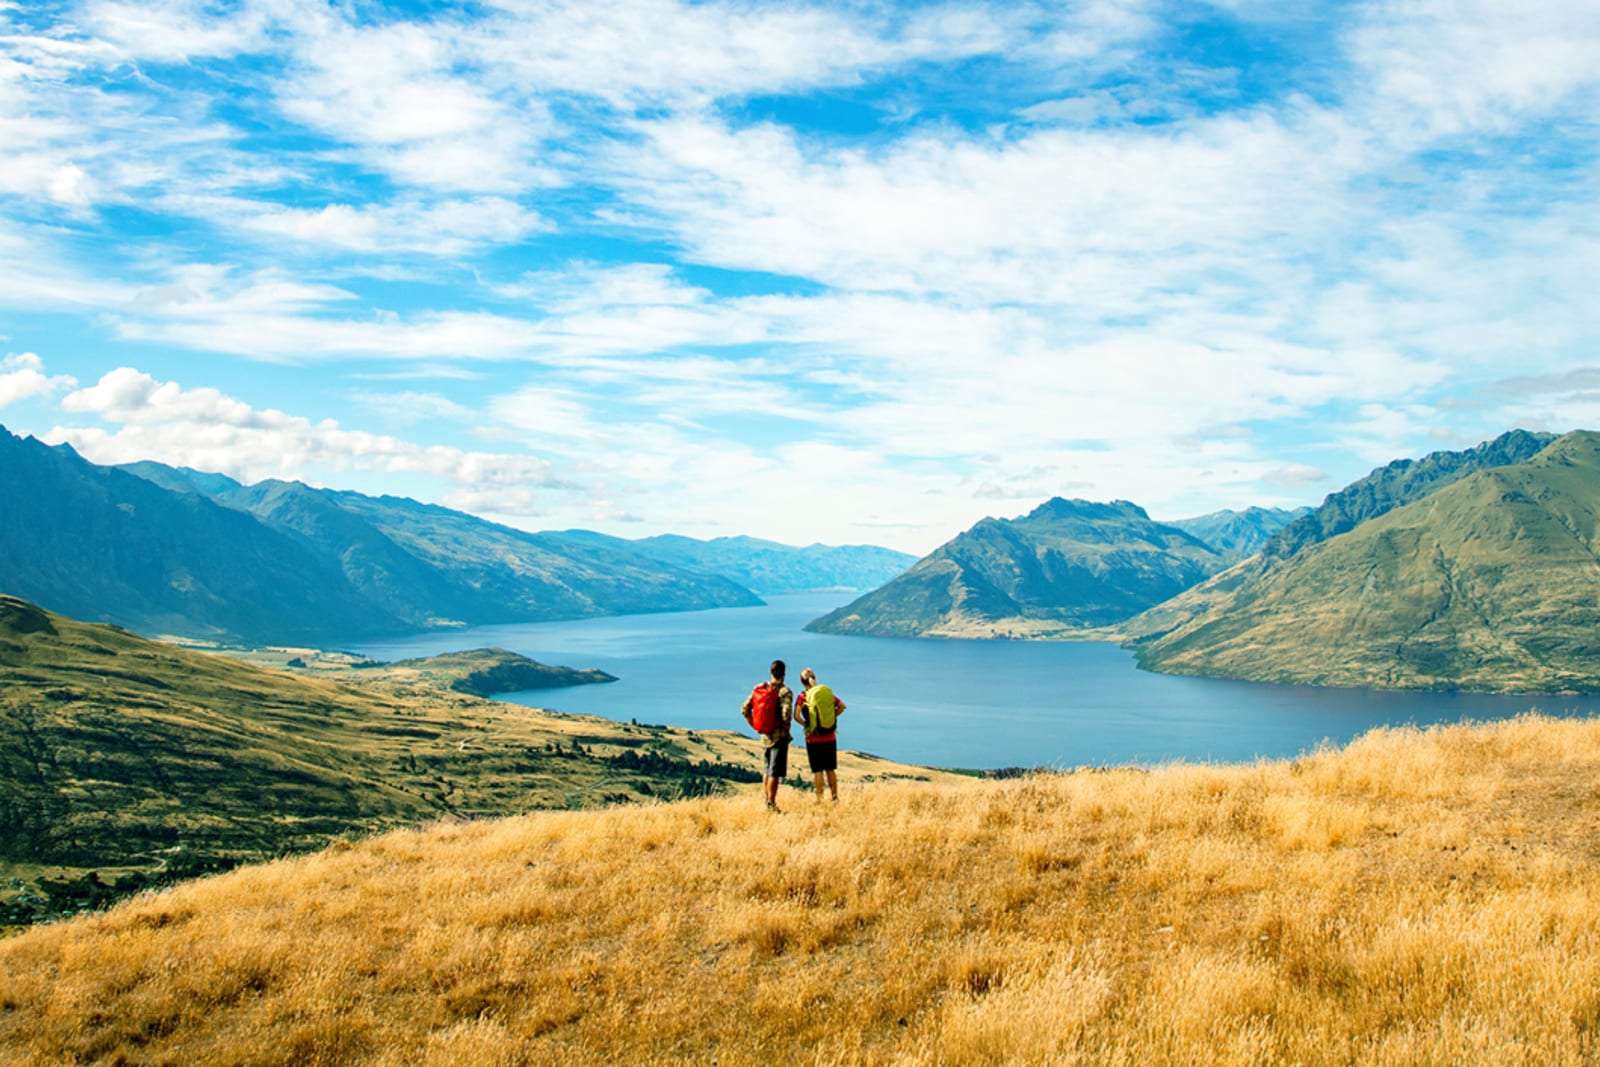 Queenstown, New Zealand has trails for novice and experienced hikers